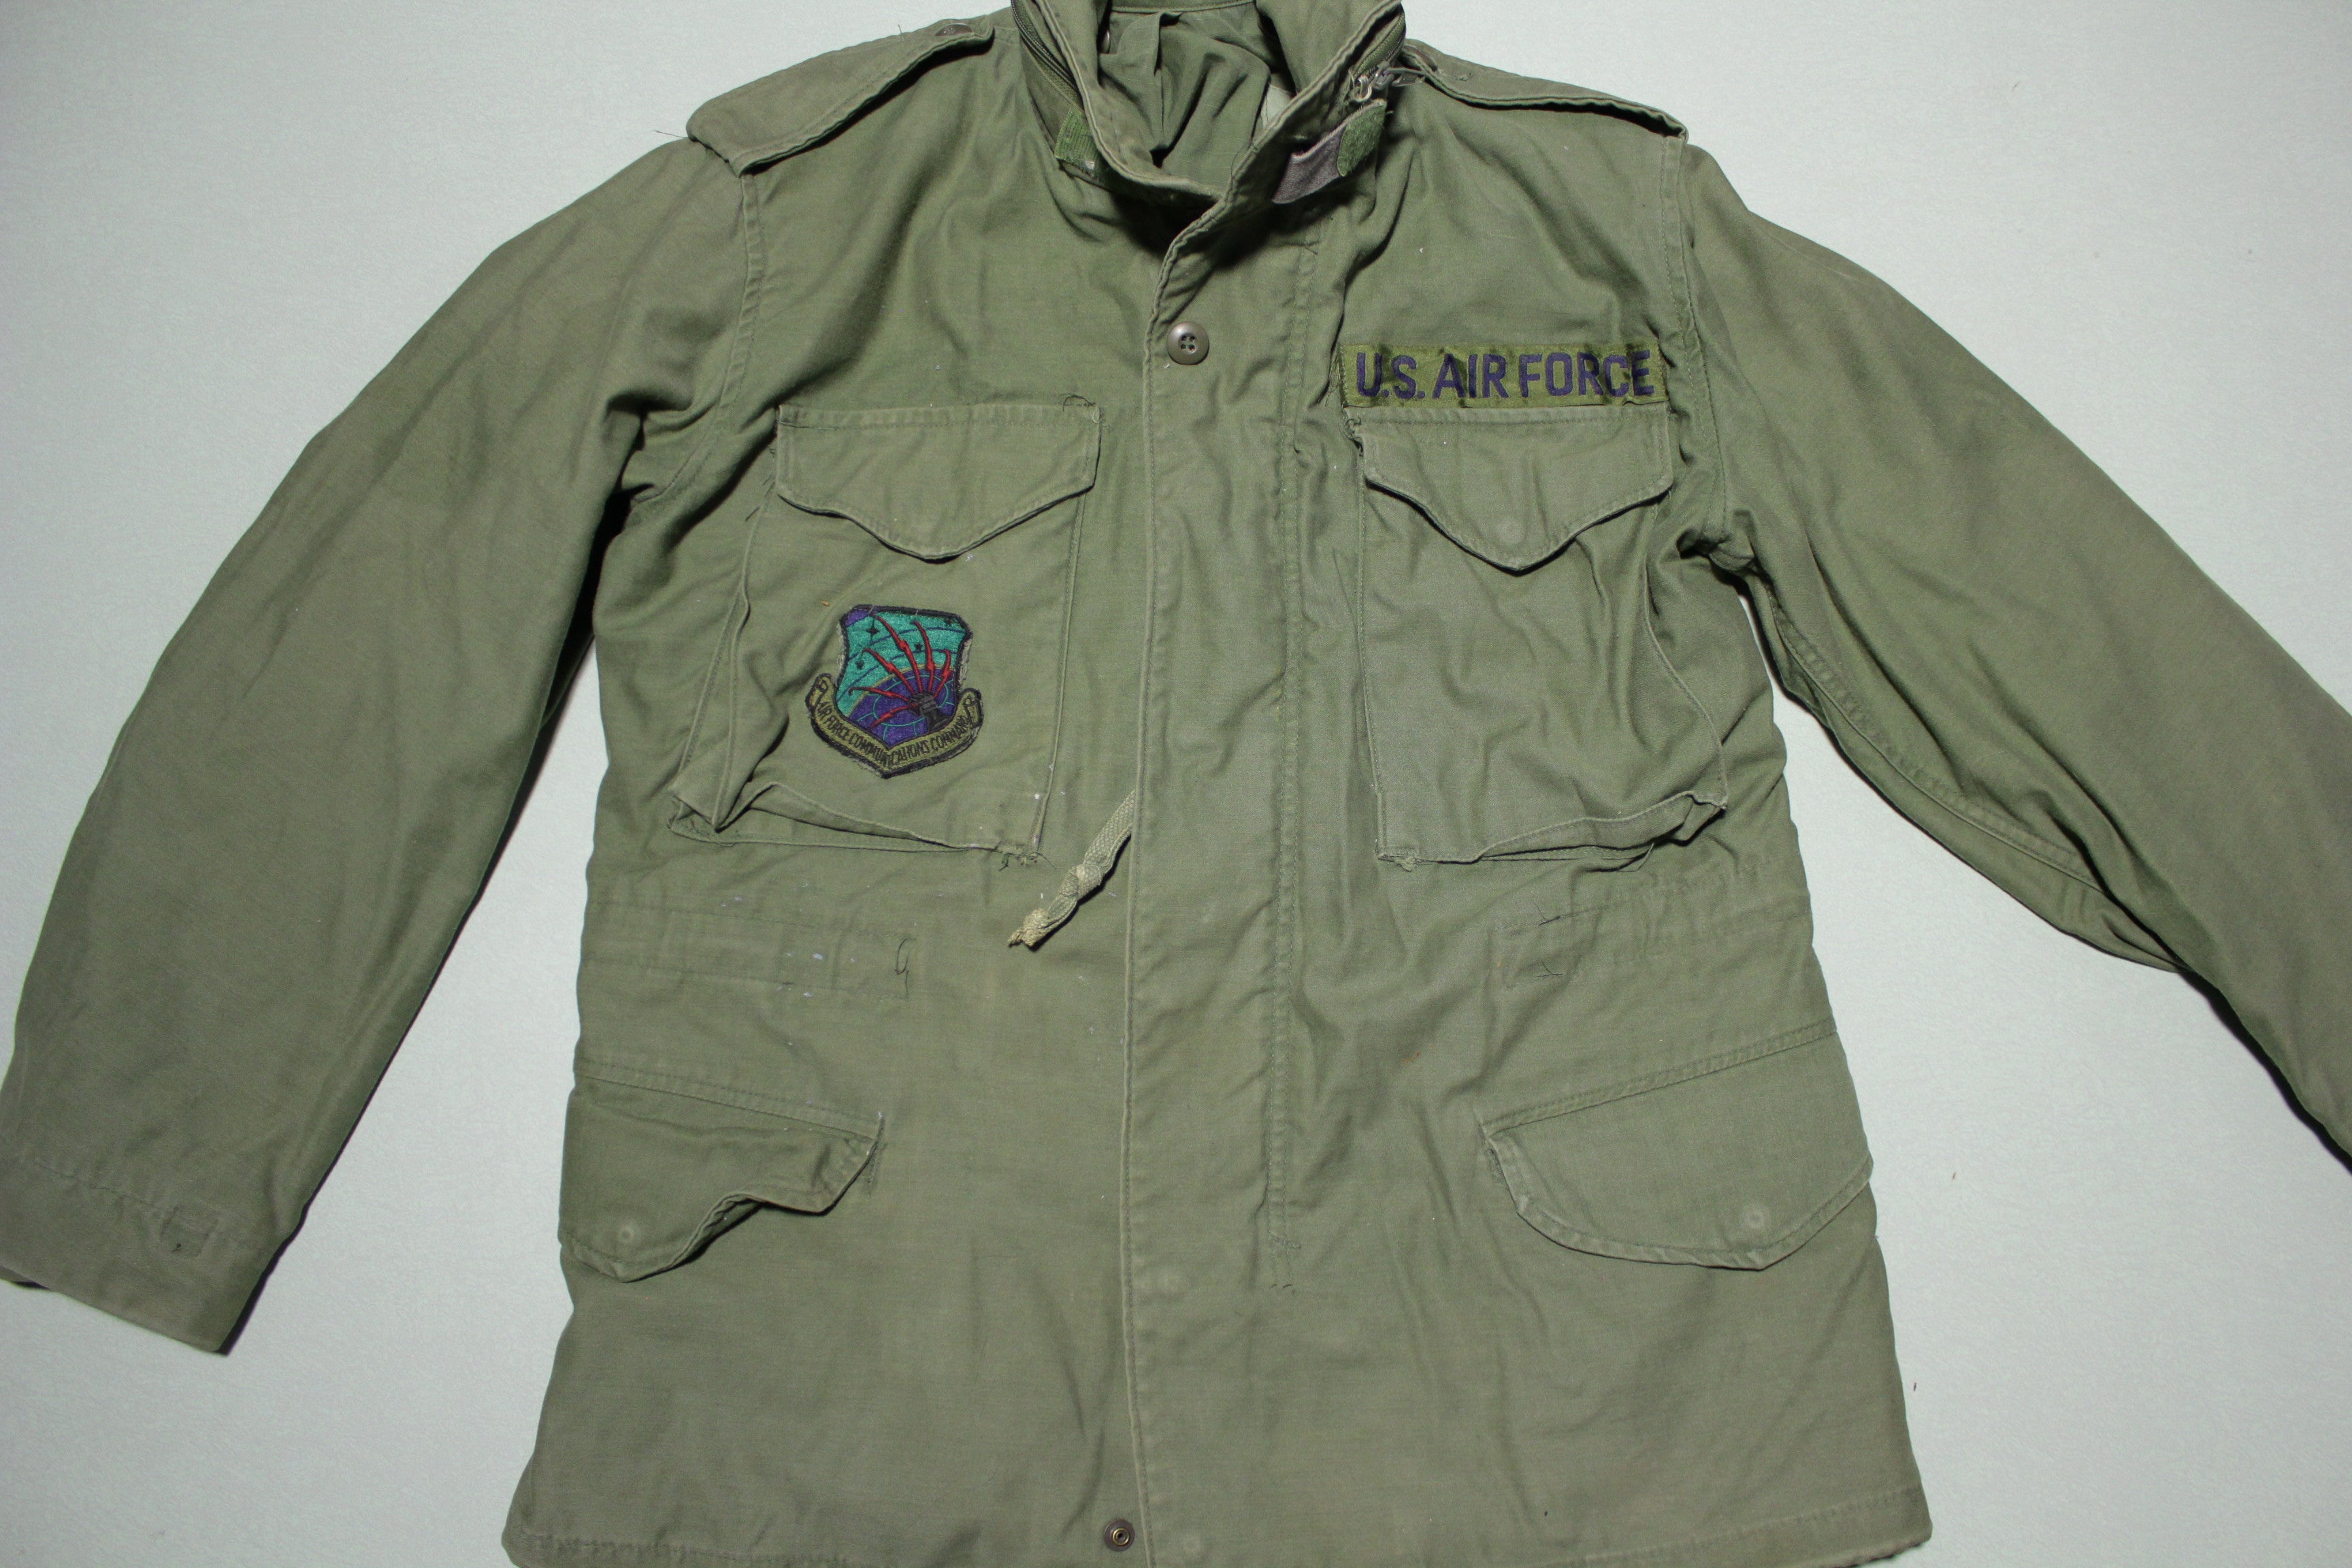 US Army Military M65 Cold Weather Field Jacket Og107 Small Short S